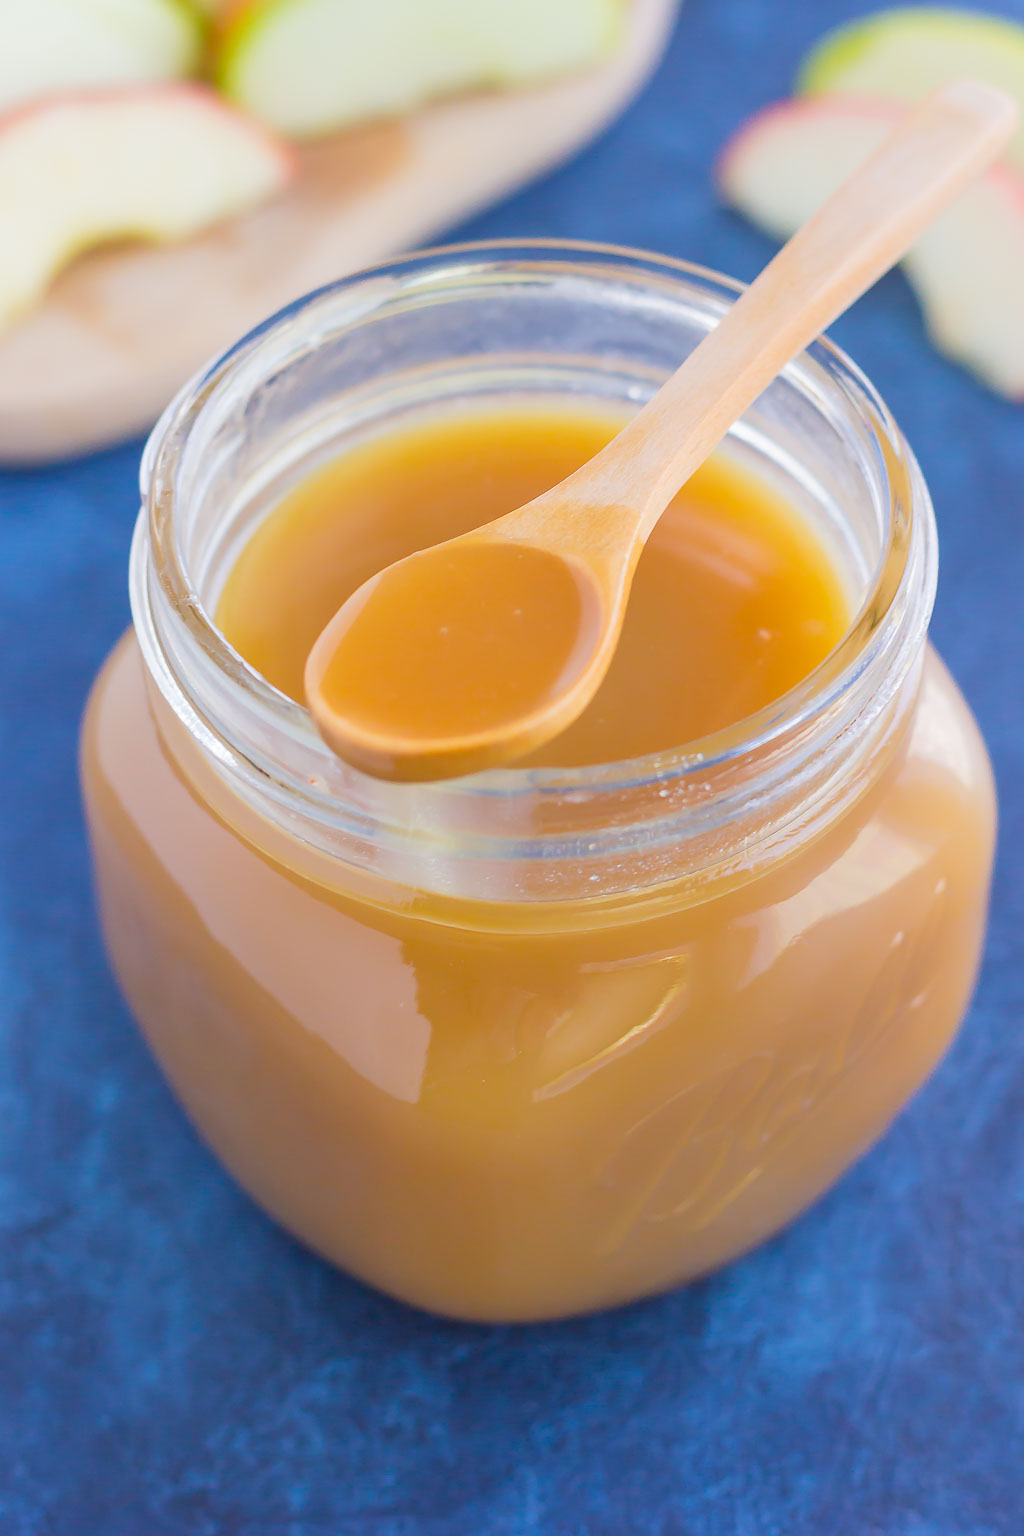 Sweet, smooth, and full of flavor, this Salted Caramel Sauce is just itching to be poured over ice cream, drizzled over pancakes, or eaten with spoon! #caramel #caramelsauce #caramelrecipe #saltedcaramelsauce #saltedcaramelrecipe #saltedcaramel #fallrecipe #falldessert #icecreamtopping 